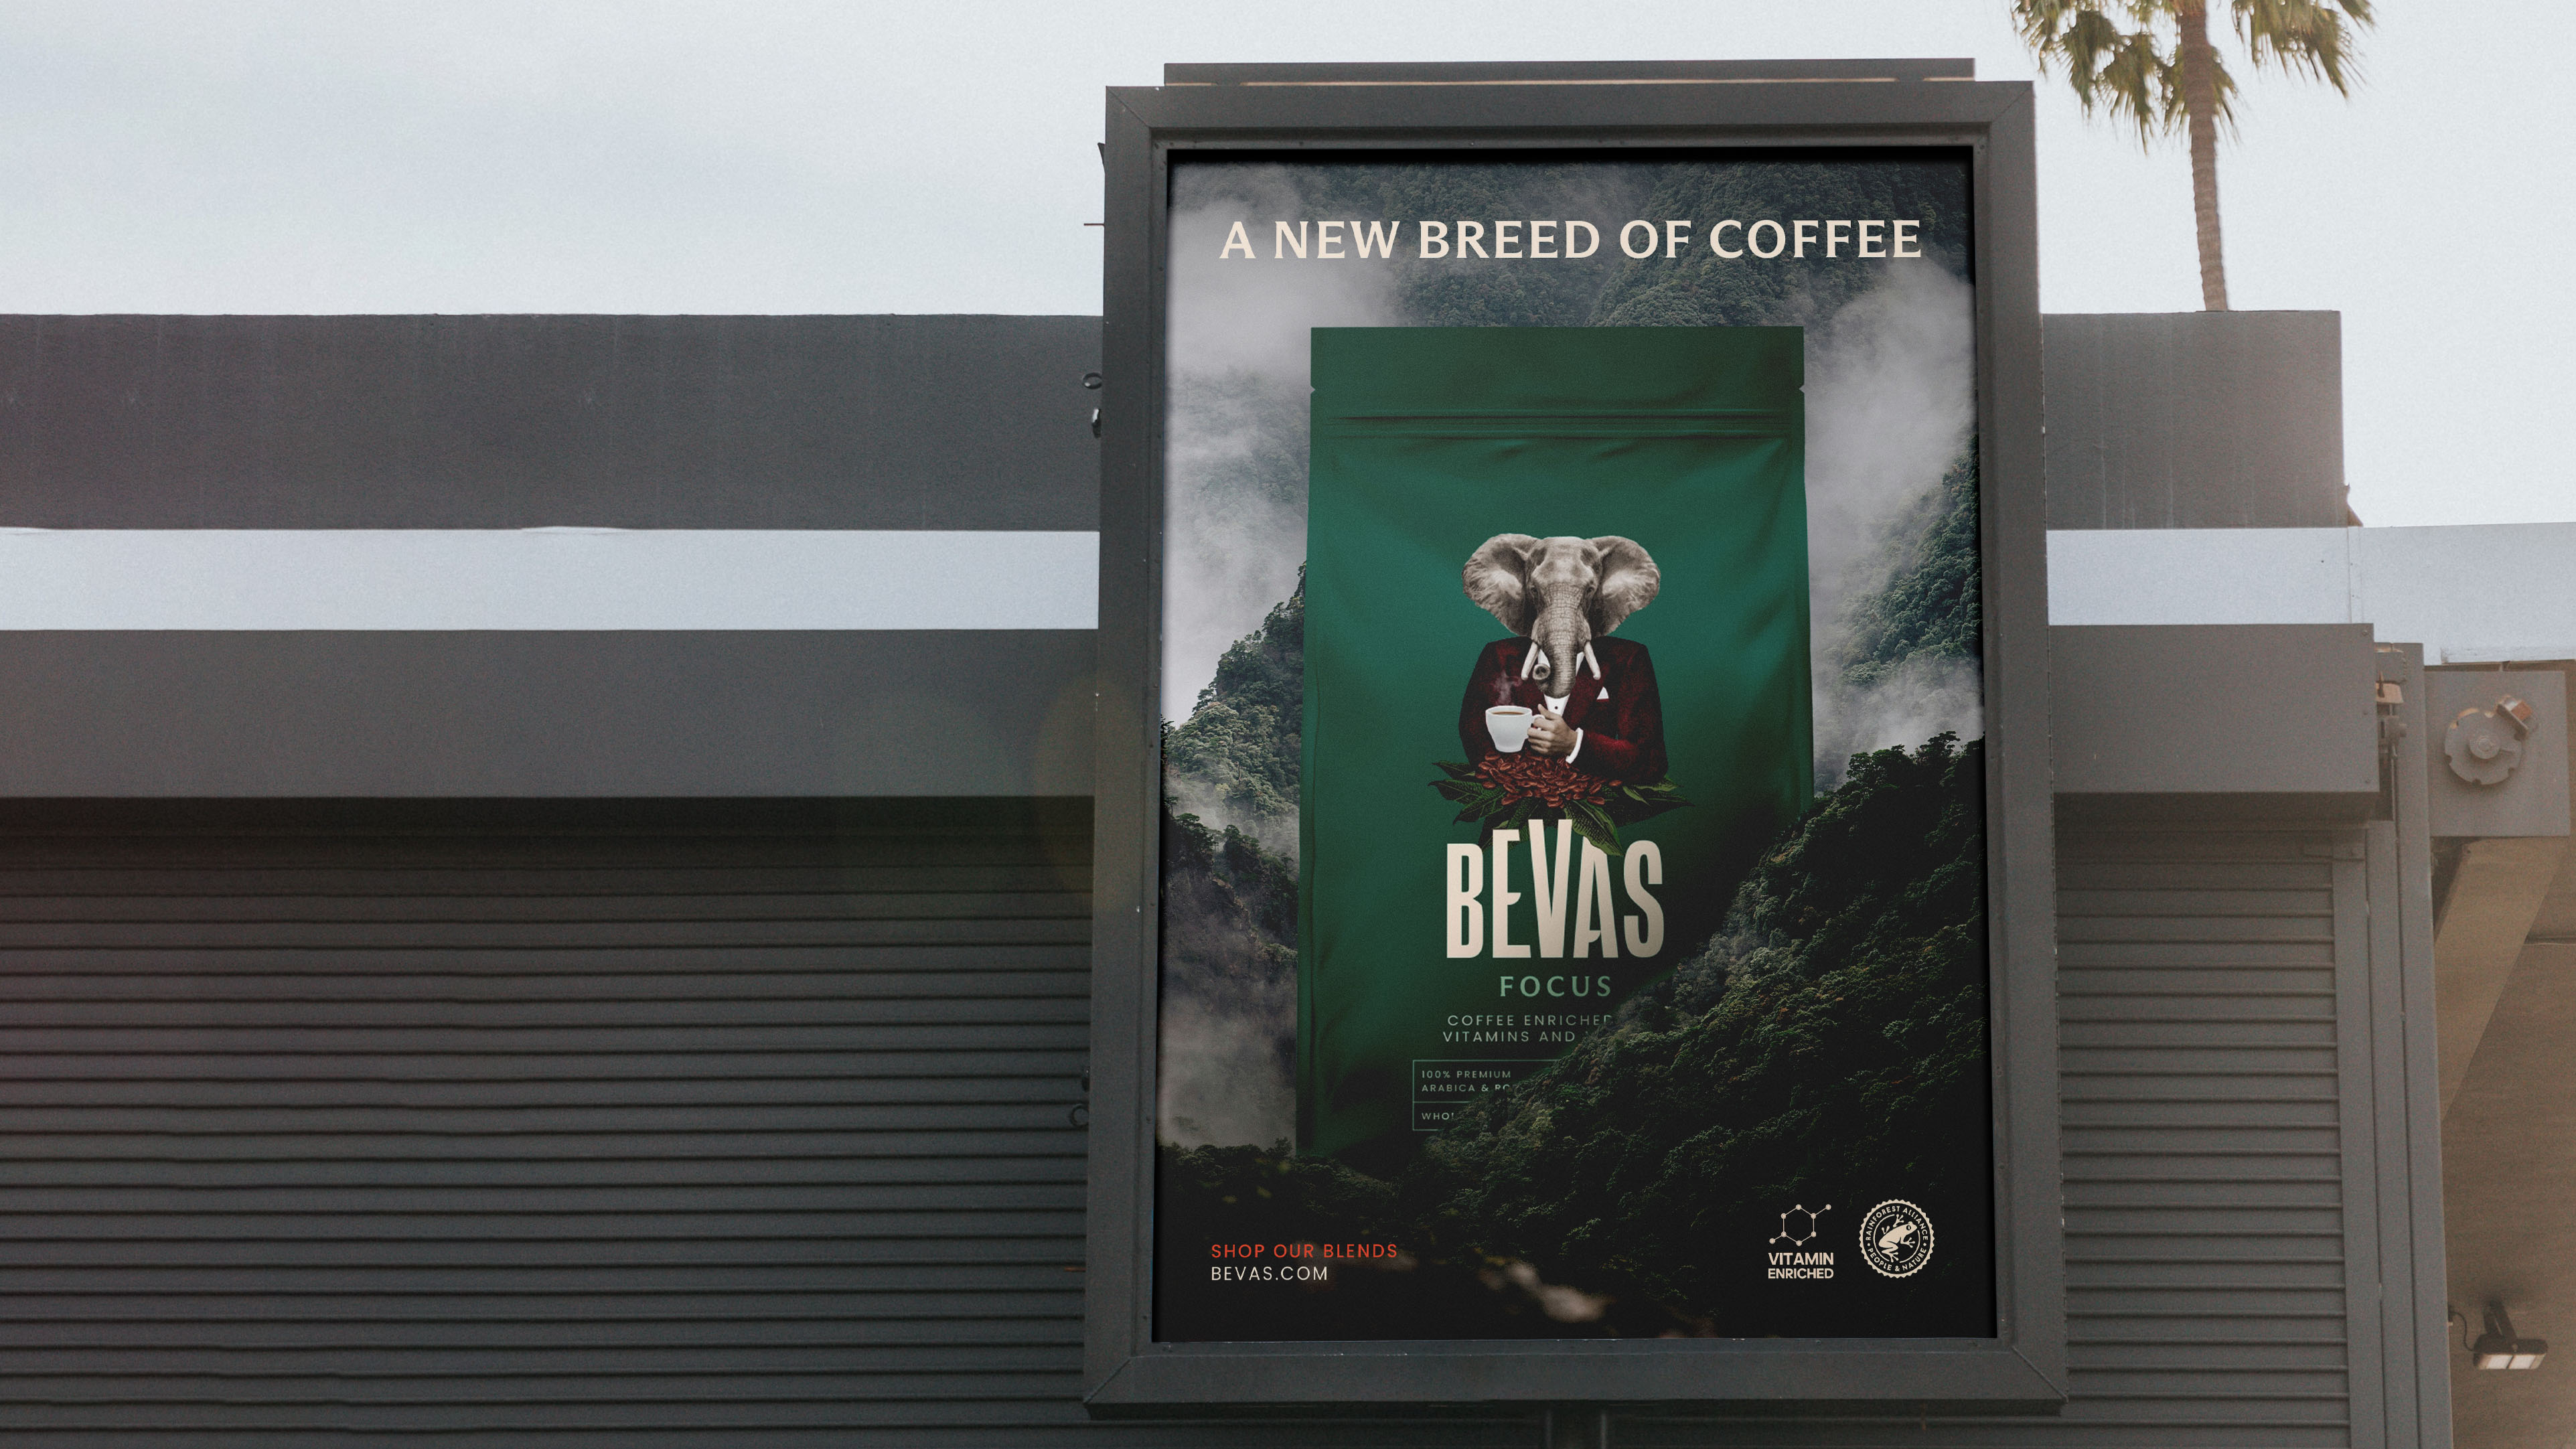 Bevas: A New Breed of Functional Coffee Blends with Innovative Packaging Design by White Bear Studio